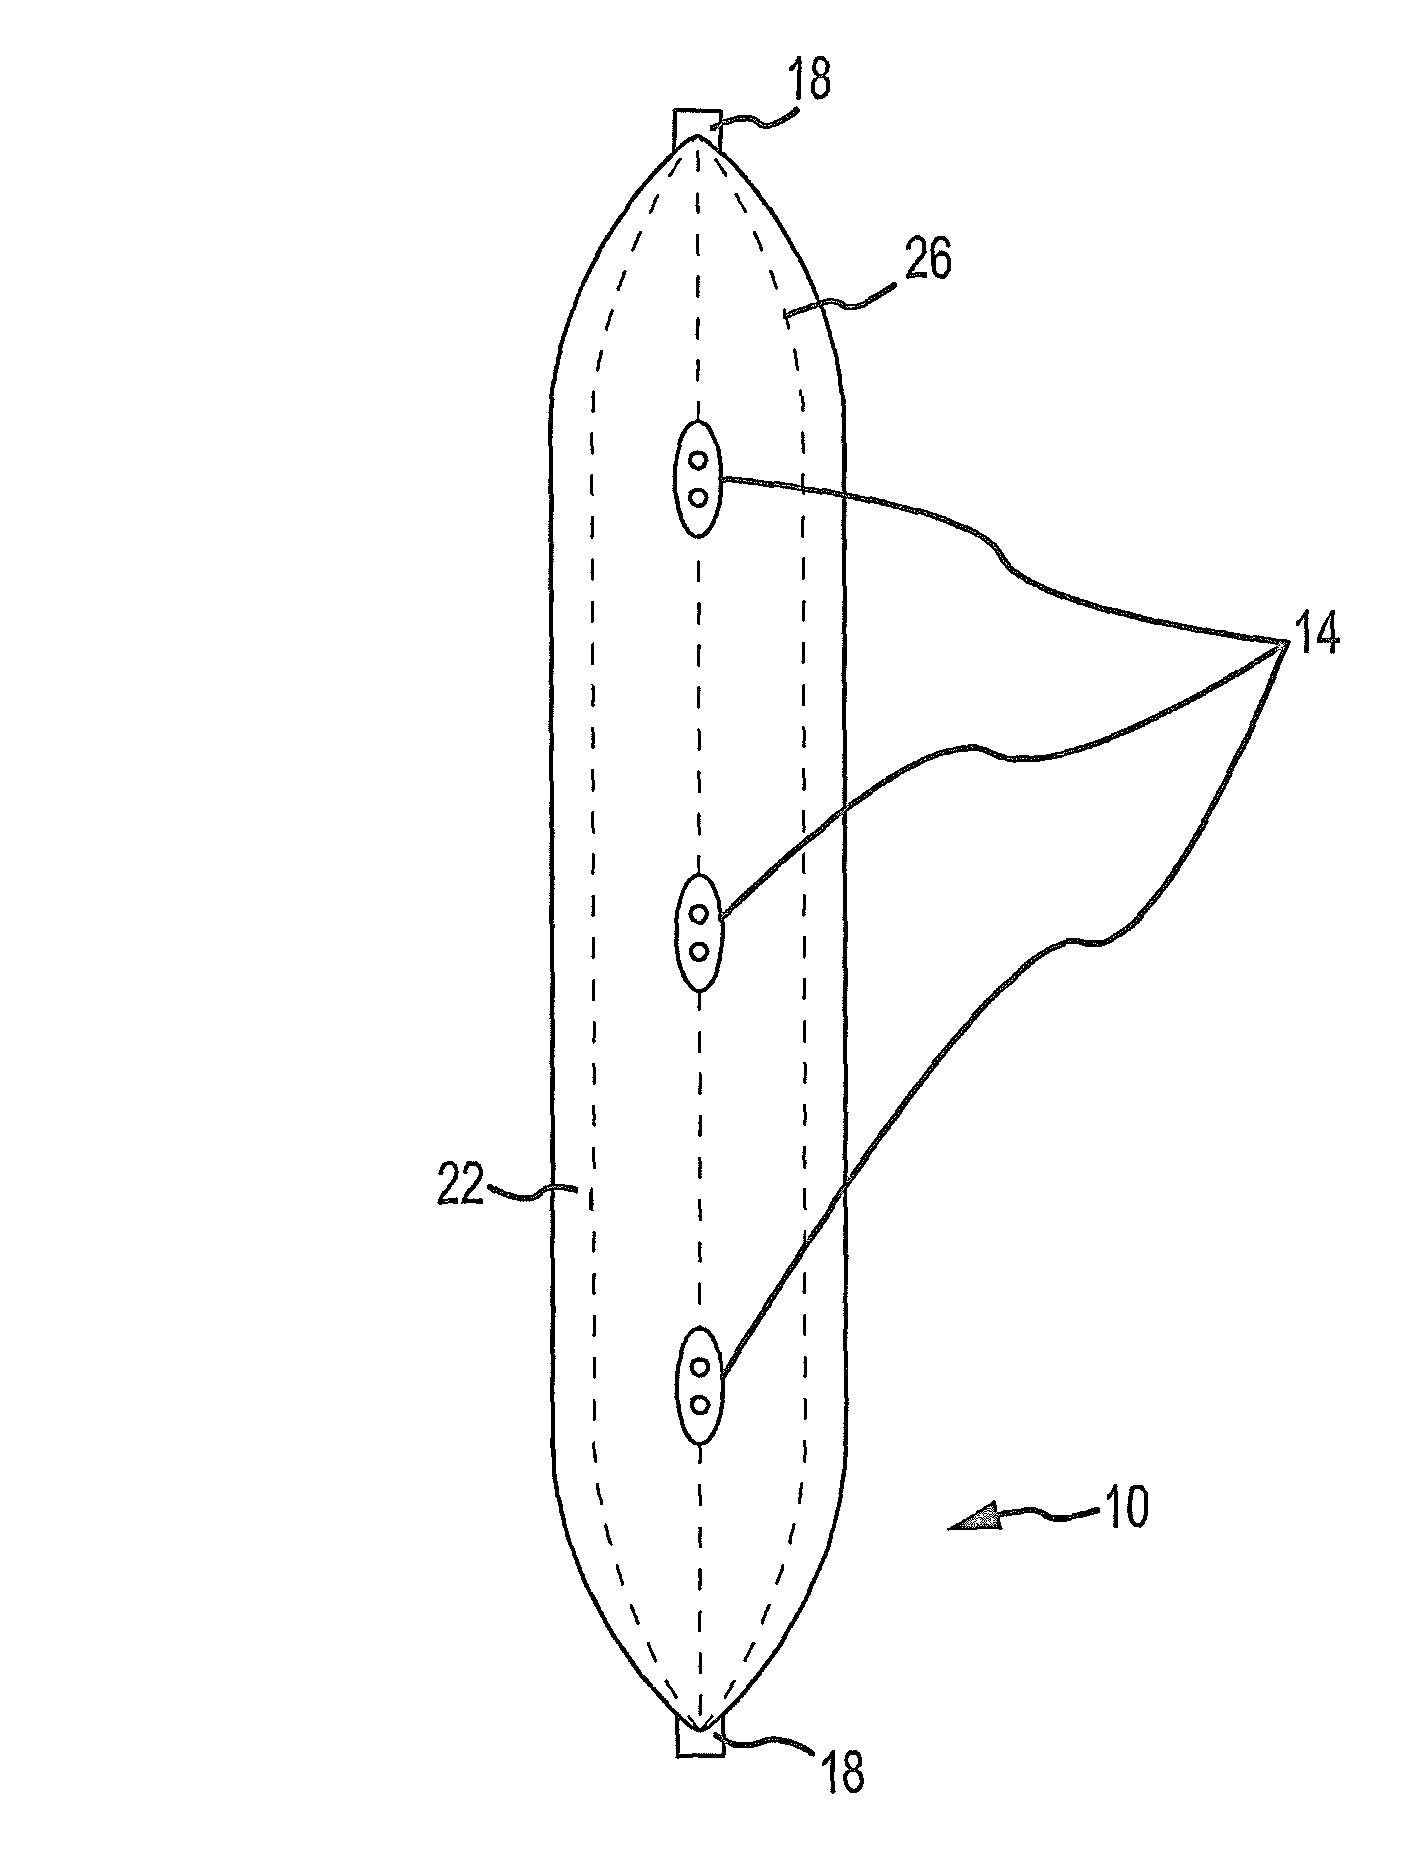 Method and system for a towed vessel suitable for transporting liquids